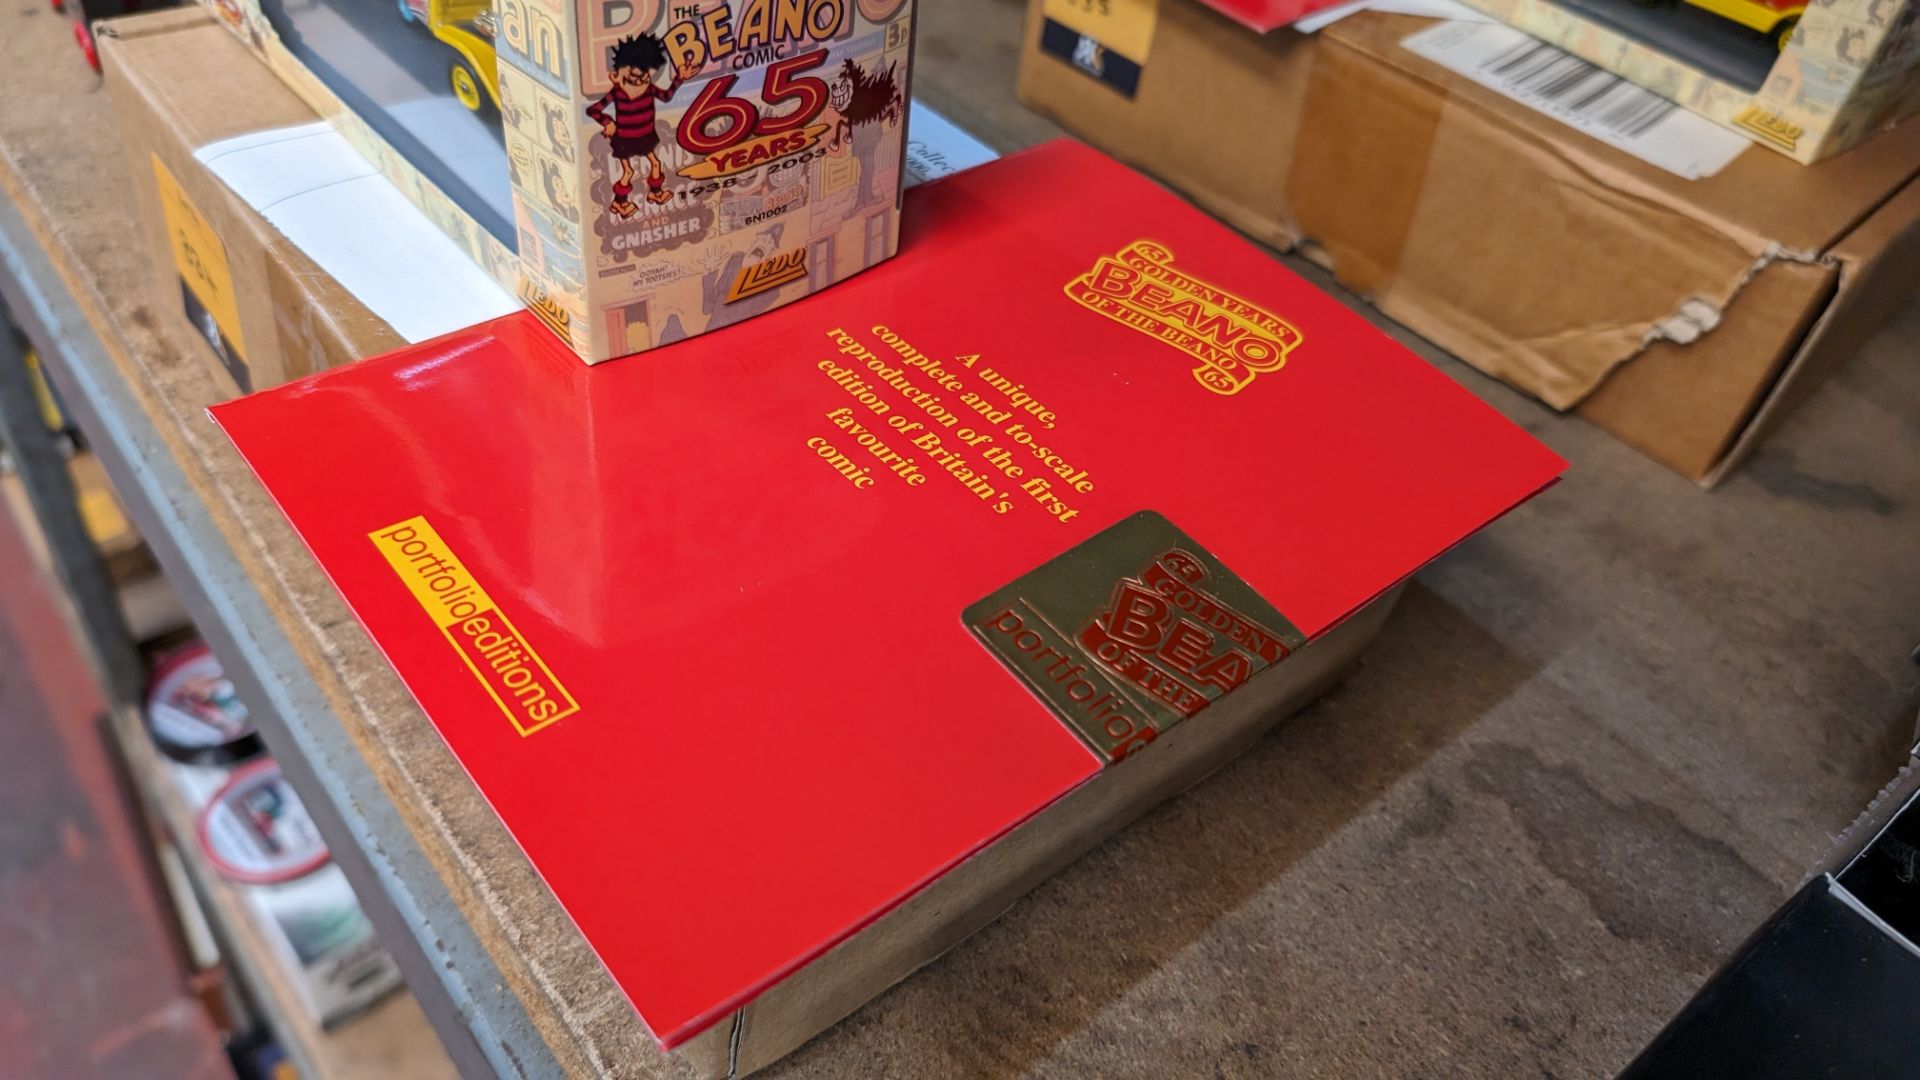 Beano 65th anniversary gift set including reproduction of the first edition of the comic plus 2 mode - Image 5 of 9